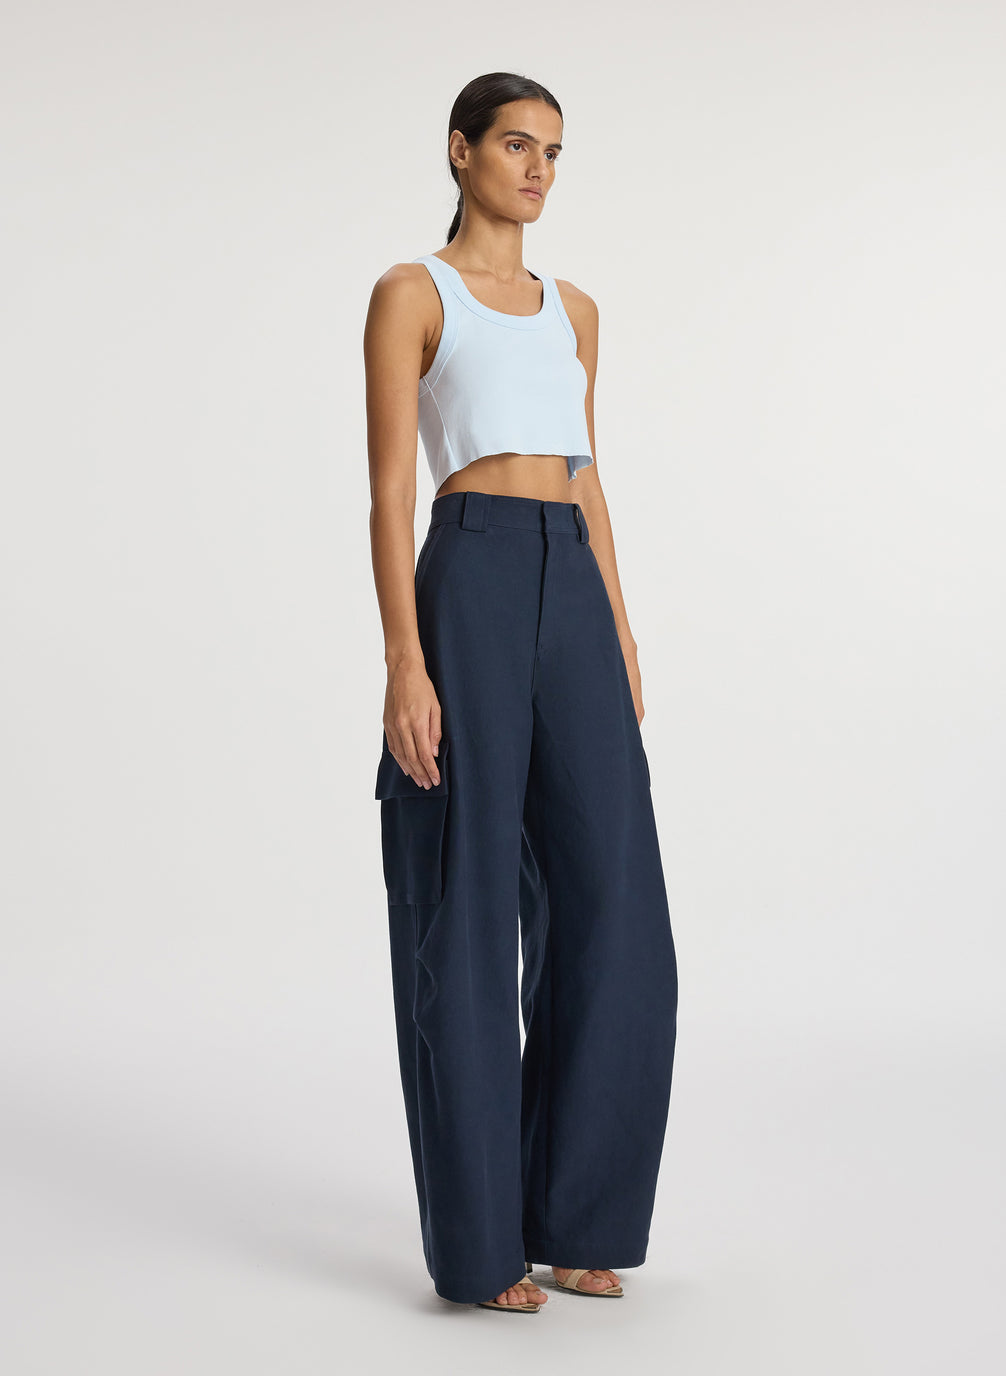 side view of woman wearing light blue cropped rib tank top and navy blue cargo pants